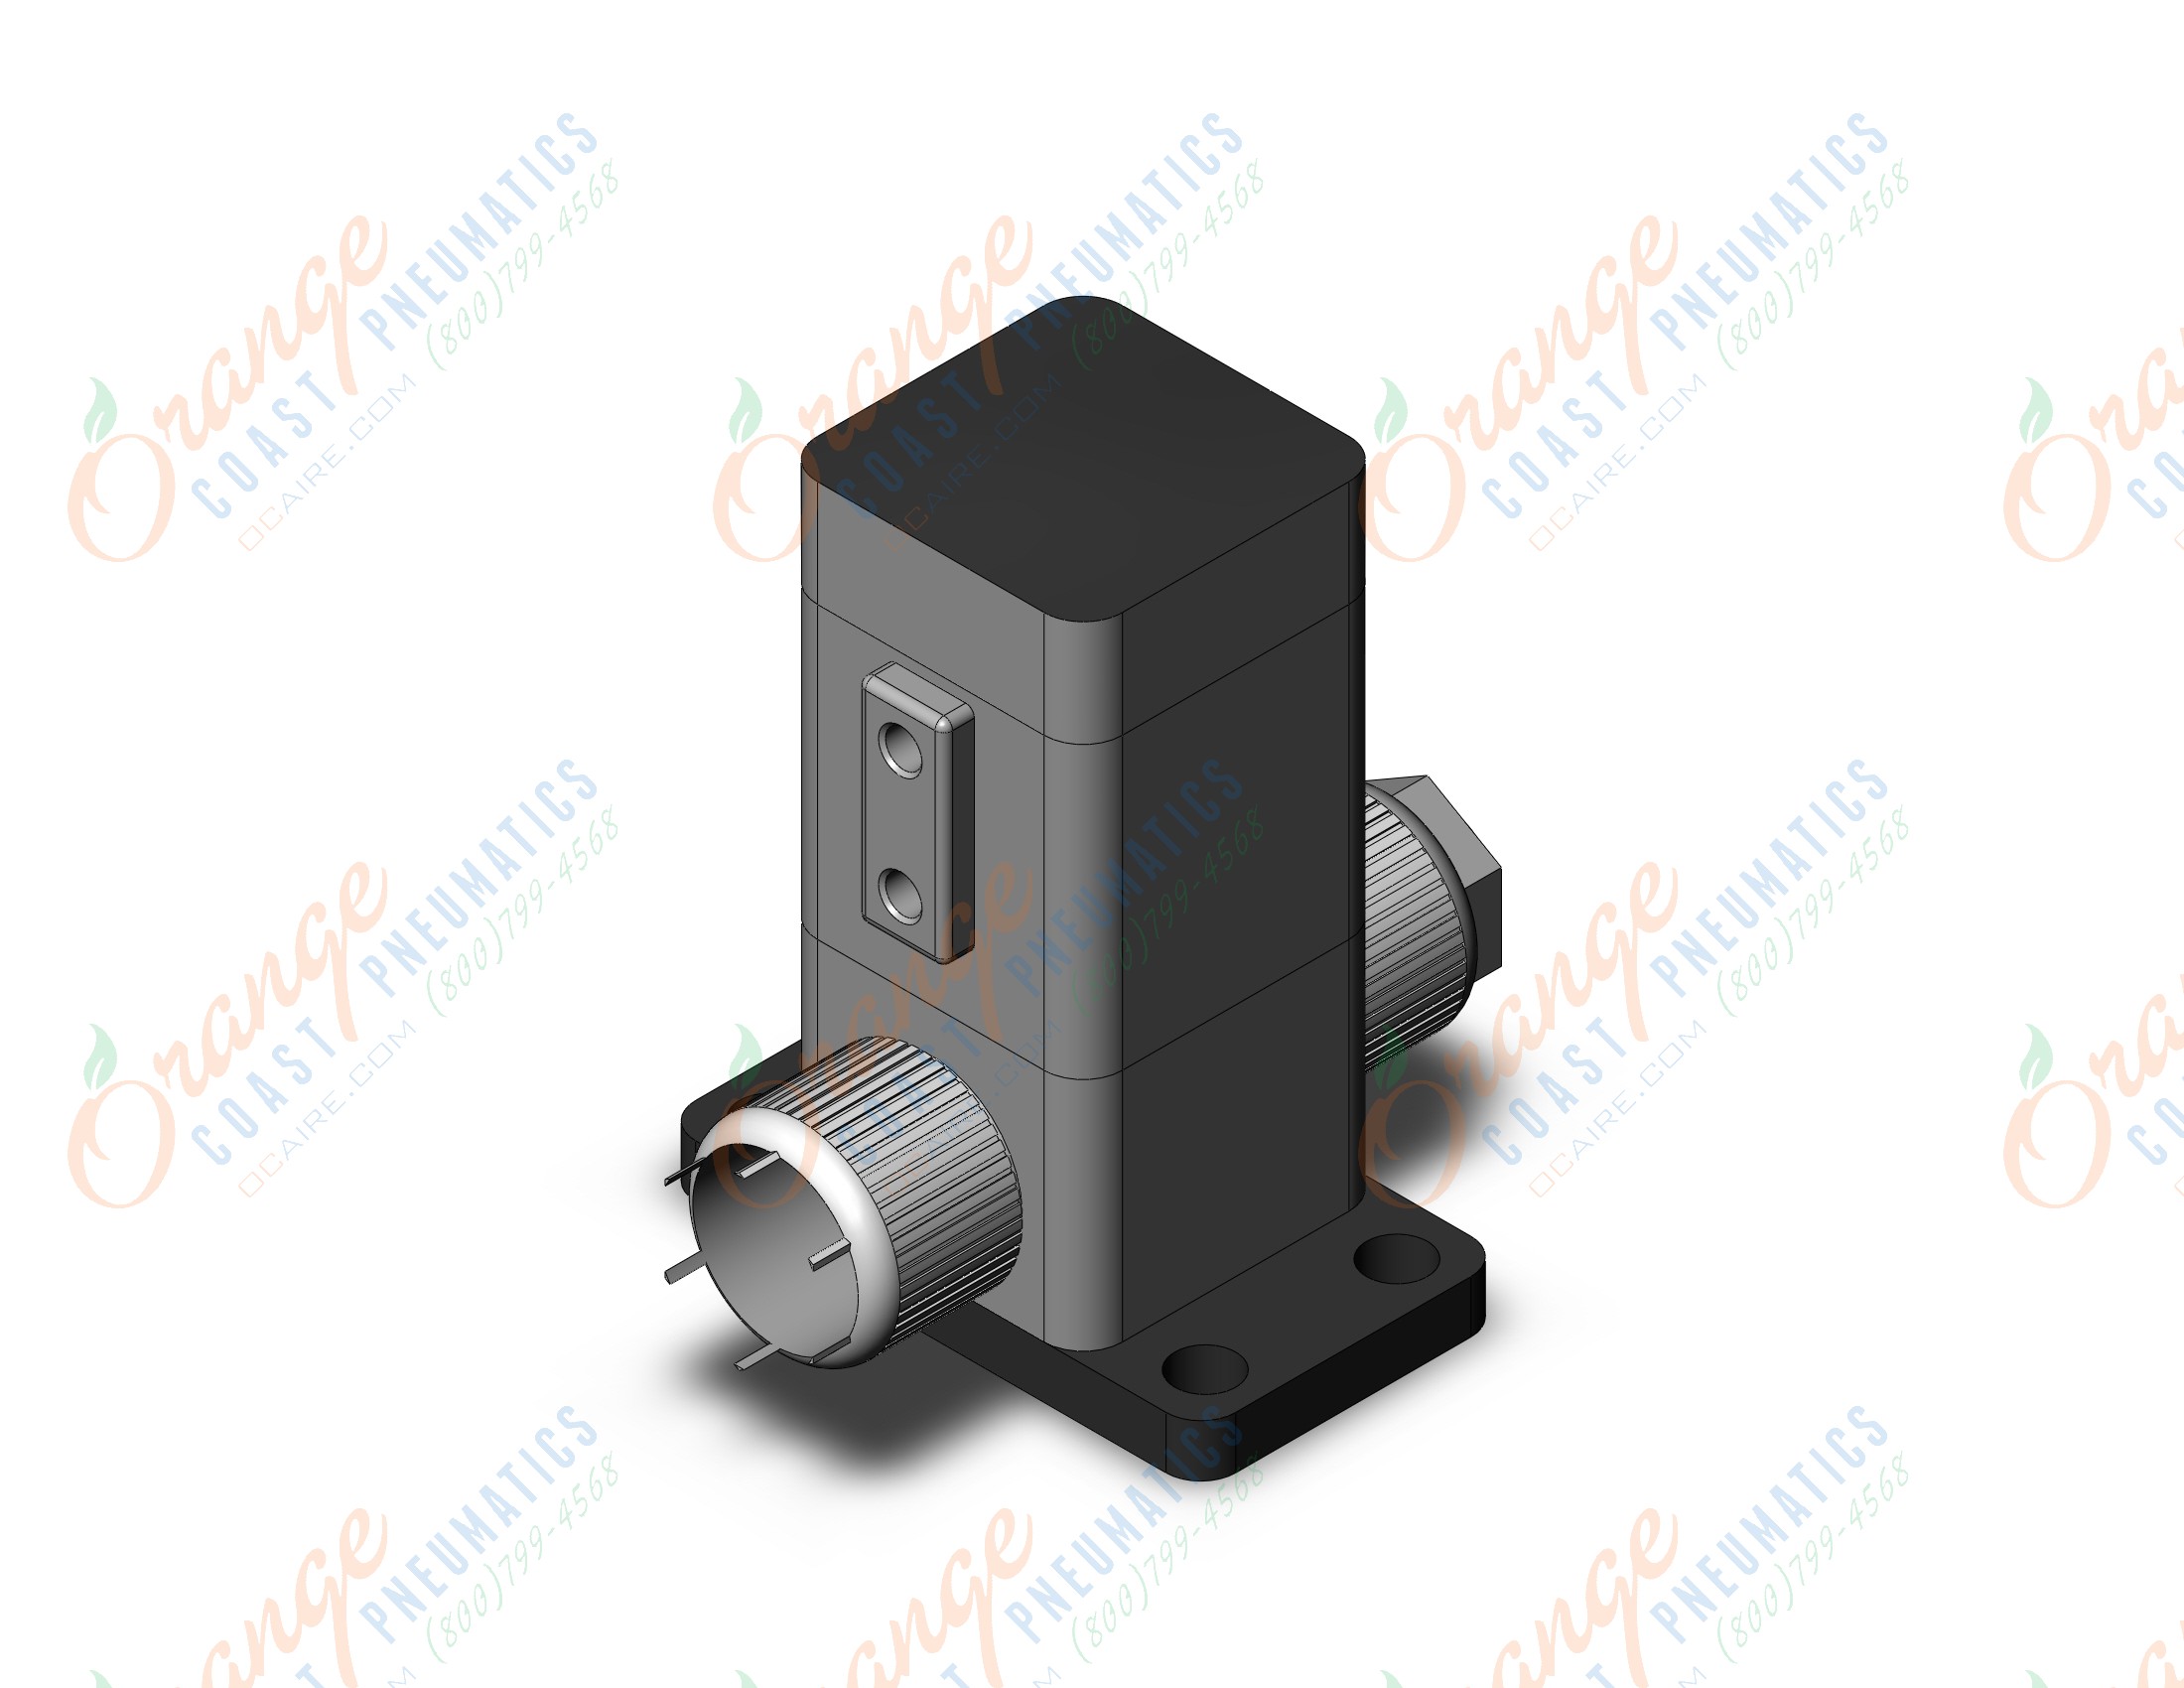 SMC LVD30-S072 air operated chemical valve, HIGH PURITY CHEMICAL VALVE, AIR OPERATED